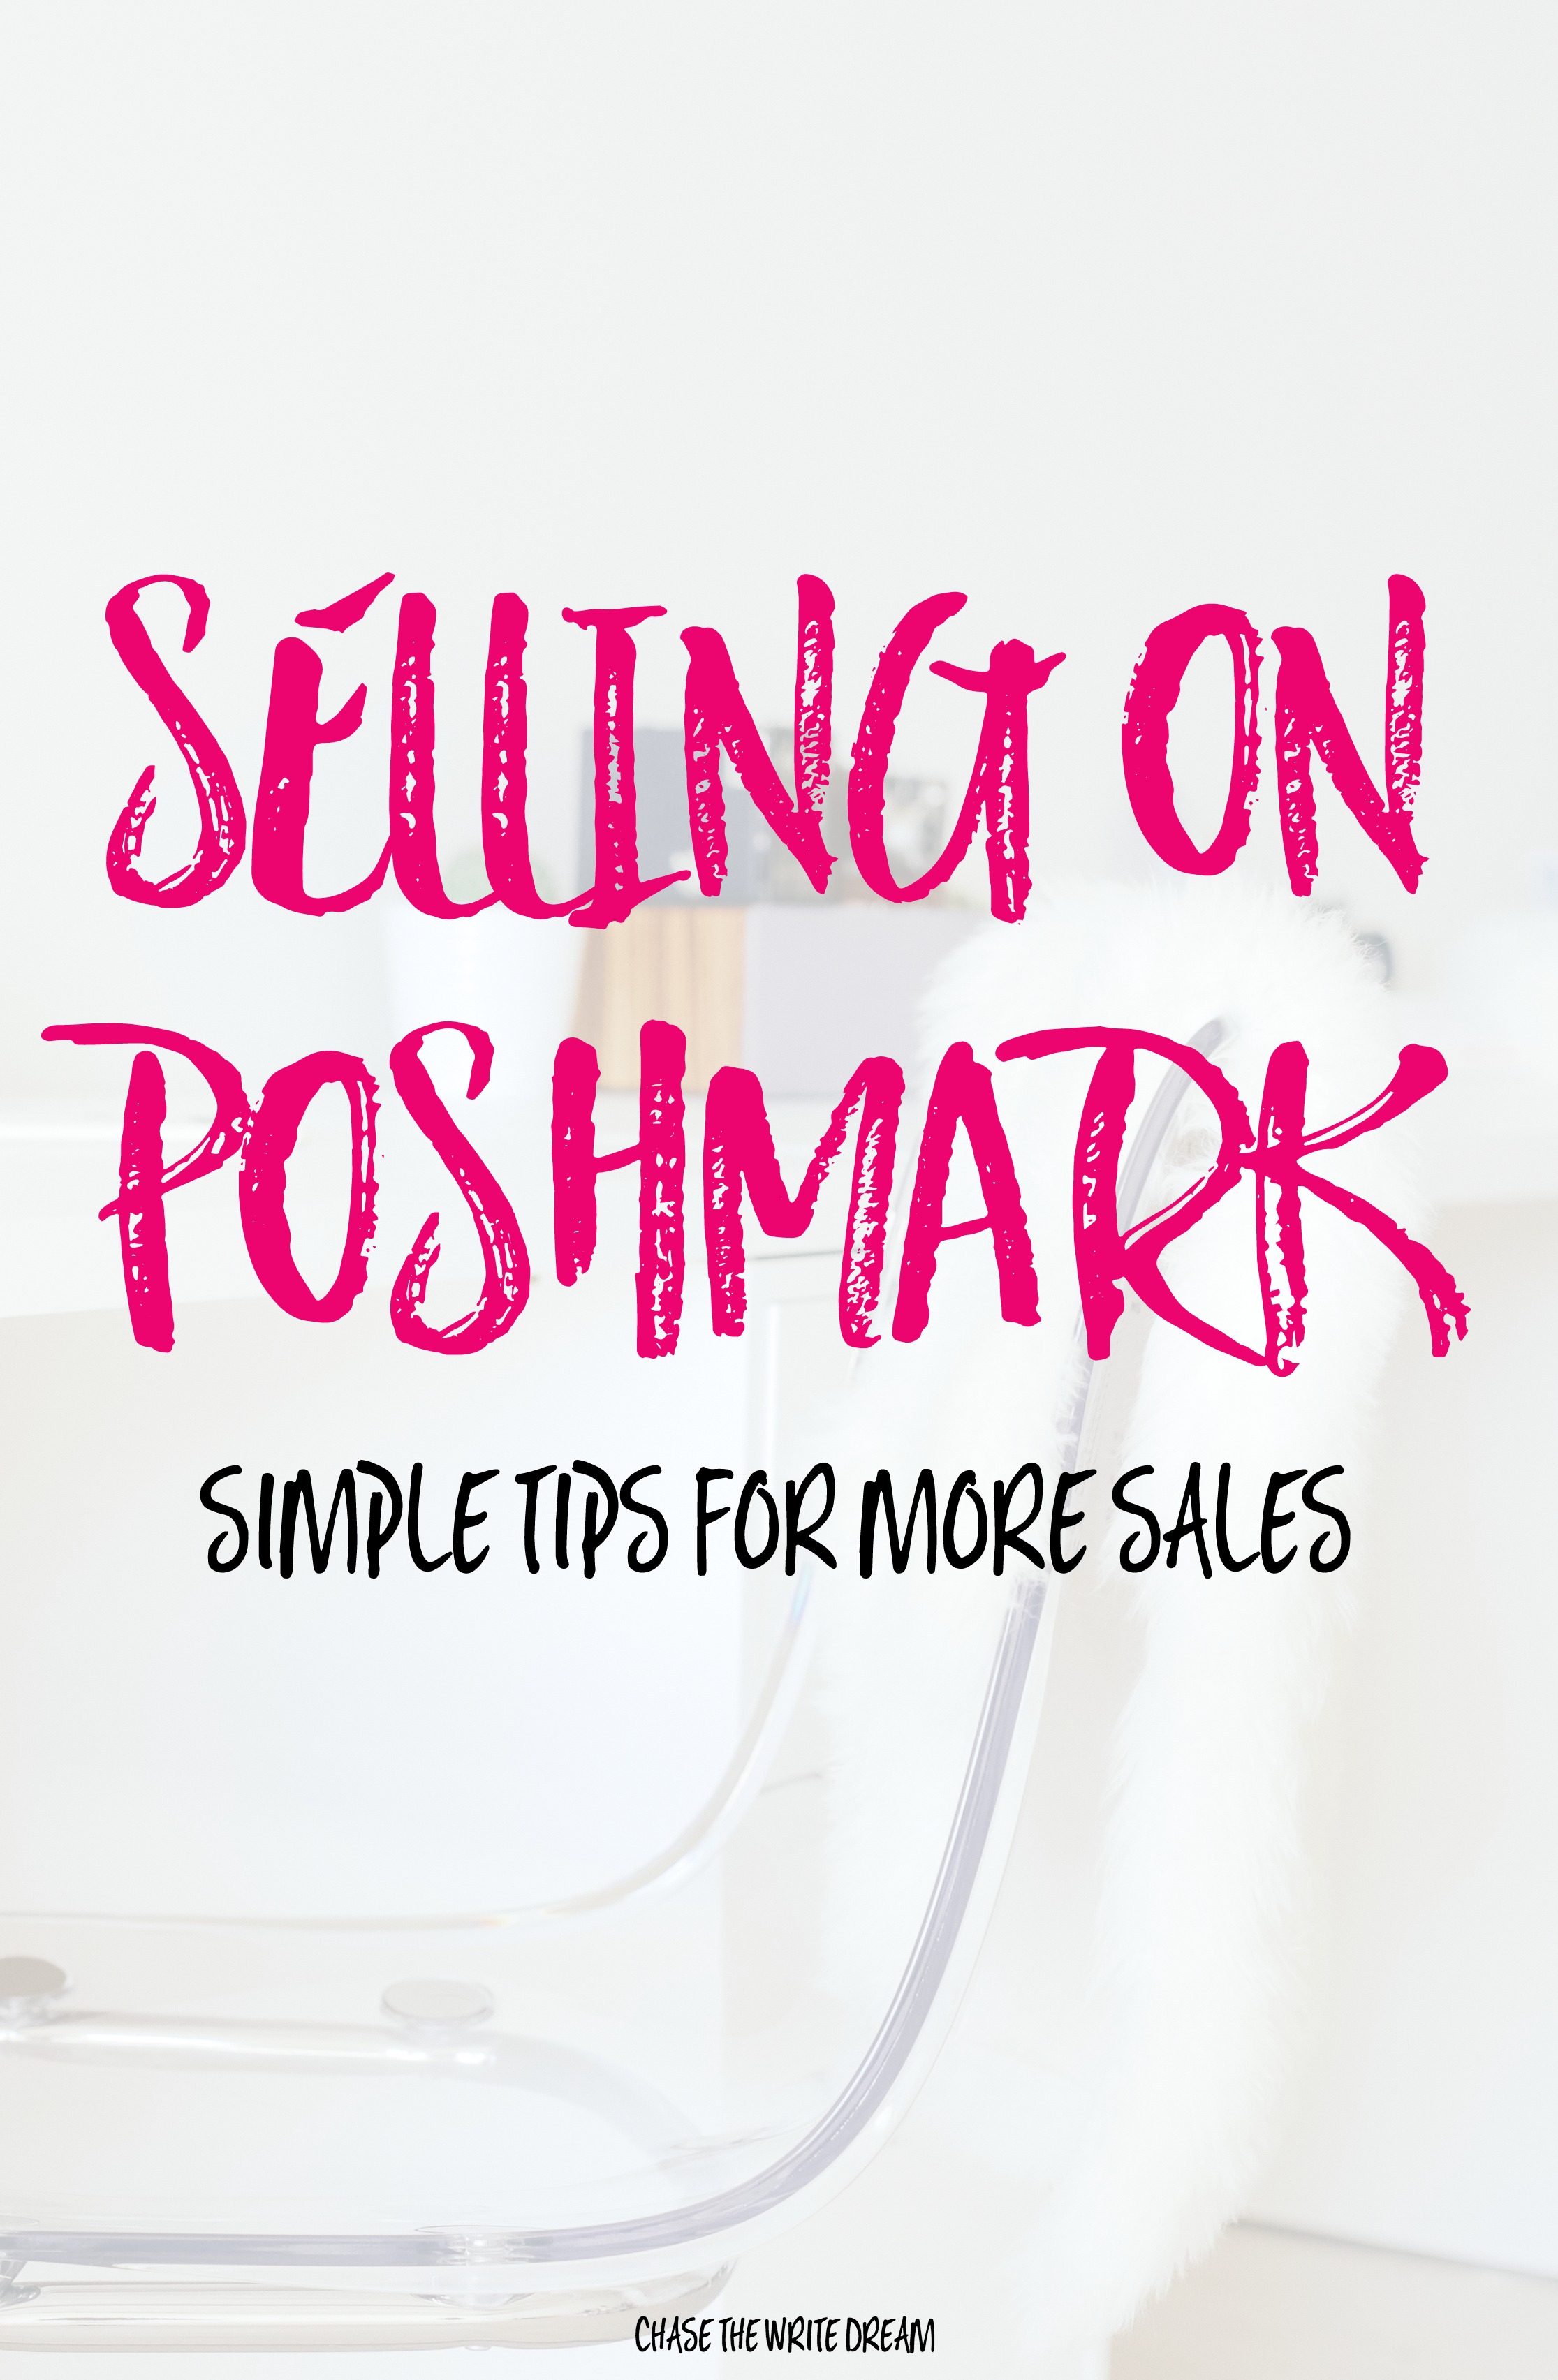 Poshmarks home market is growing fast as it strives to 